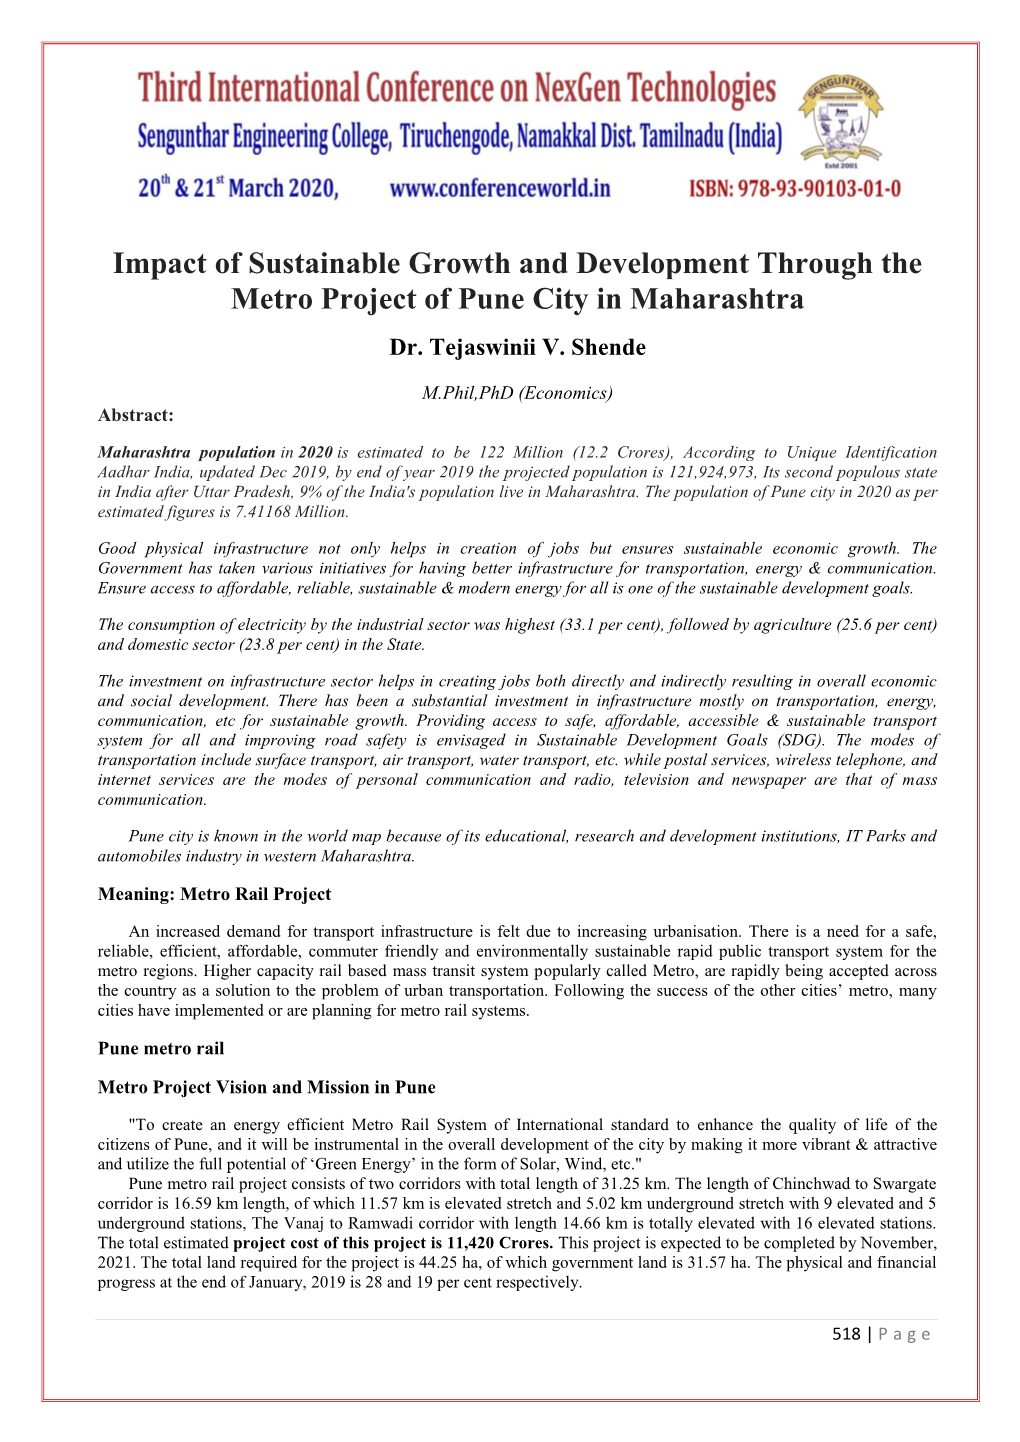 Impact of Sustainable Growth and Development Through the Metro Project of Pune City in Maharashtra Dr